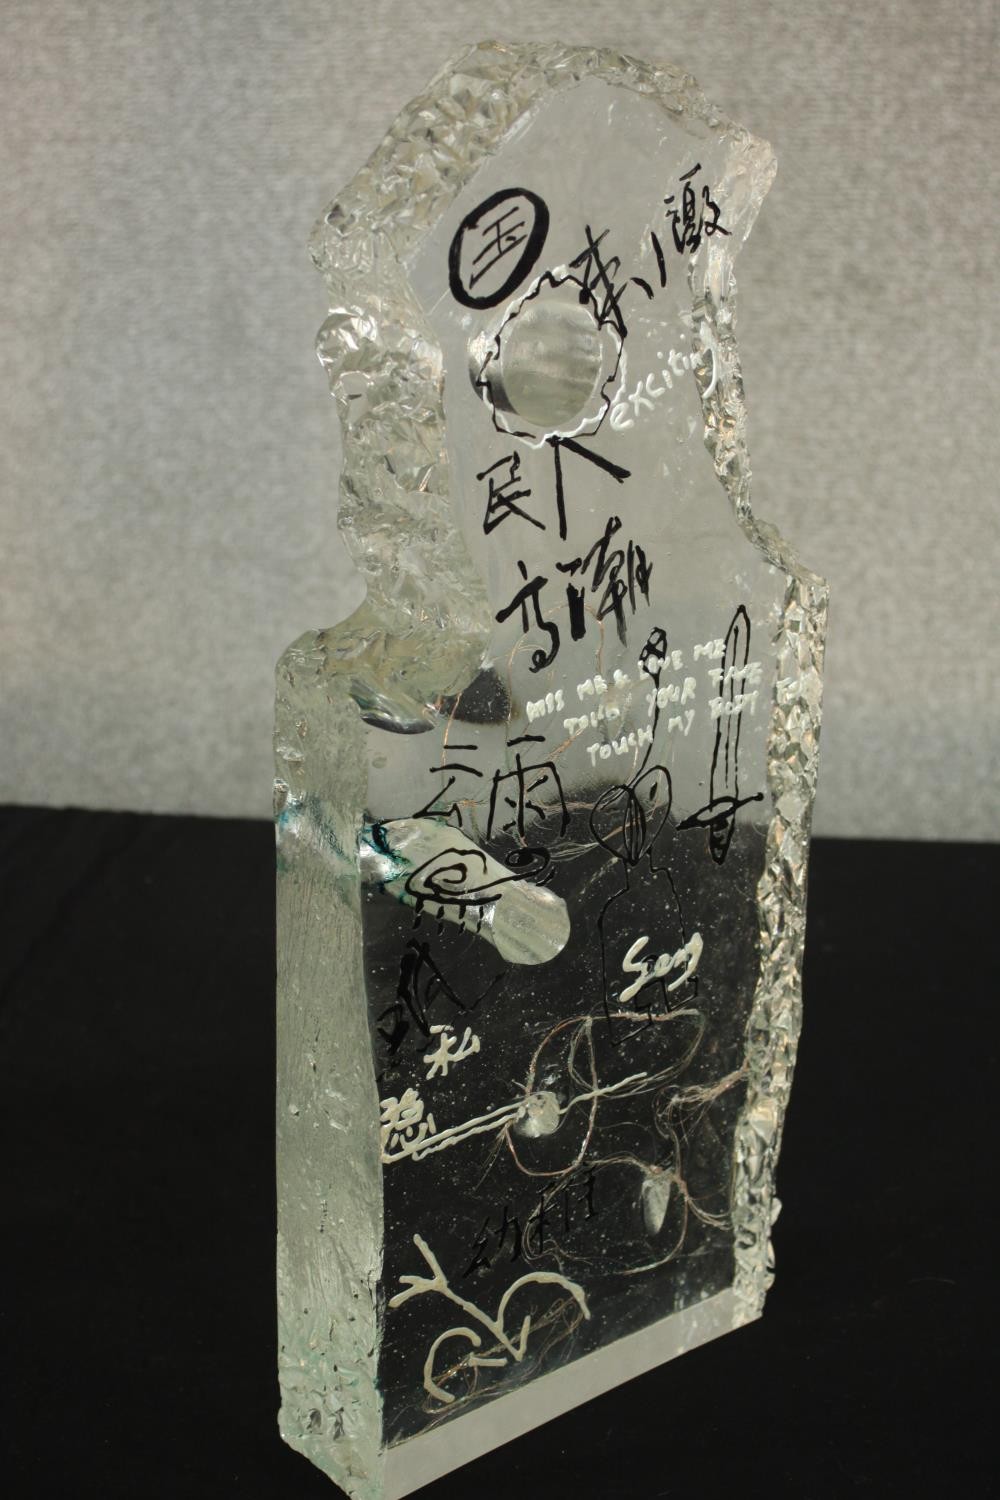 Two contemporary Asian glass sculptures, each with graffiti style decoration and suspended wire - Image 14 of 18